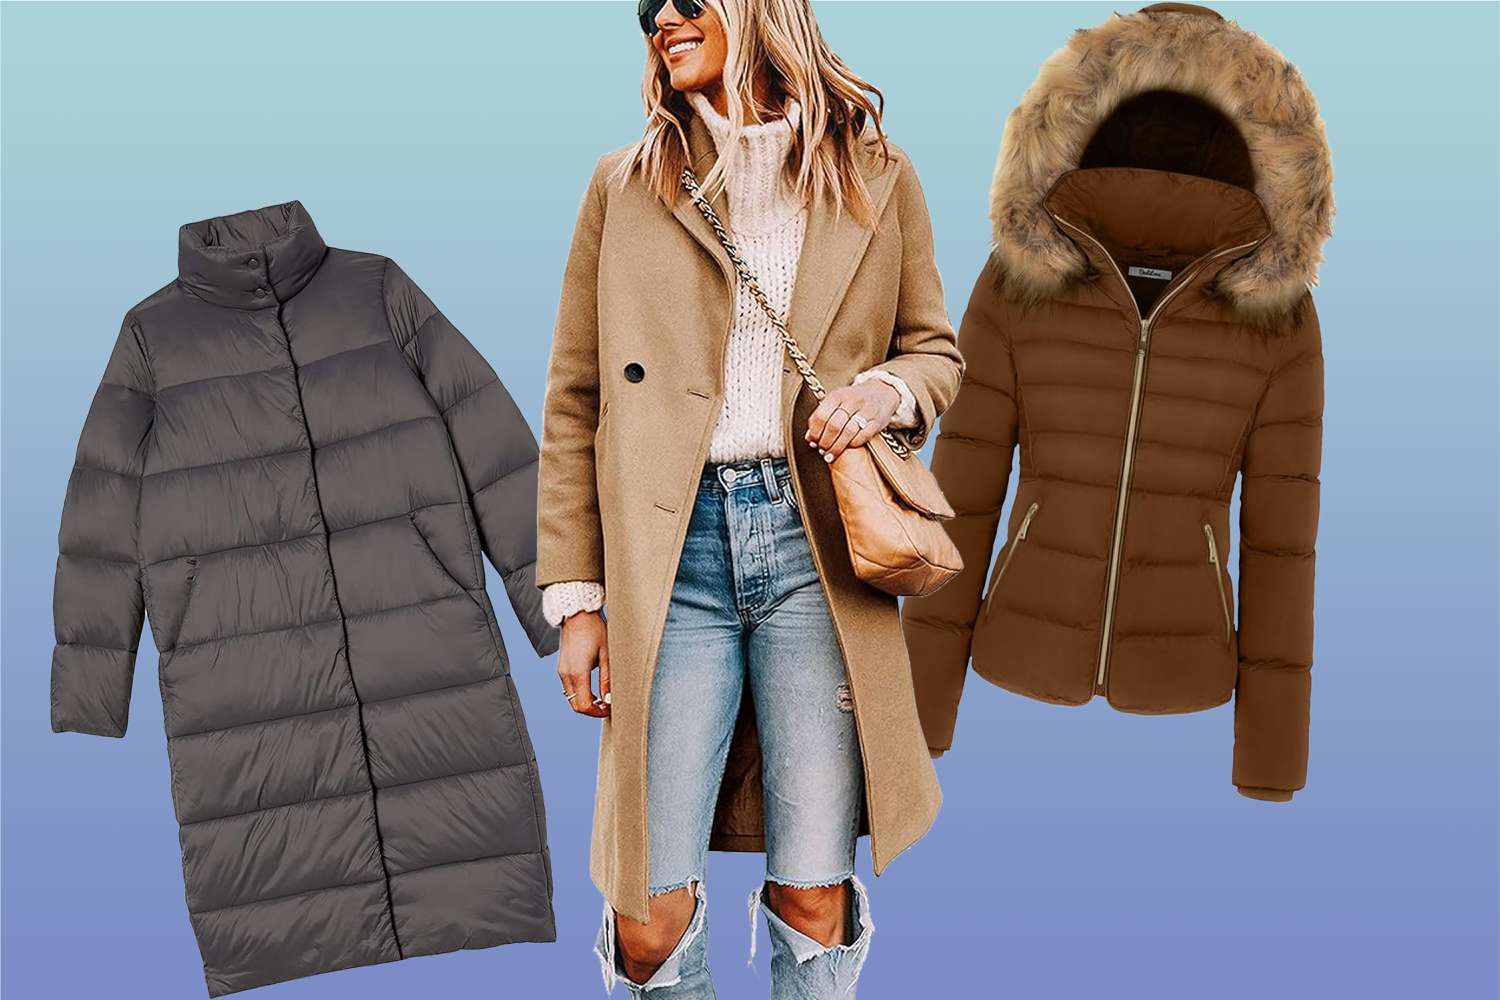 15 Best Places to Buy Winter Clothes